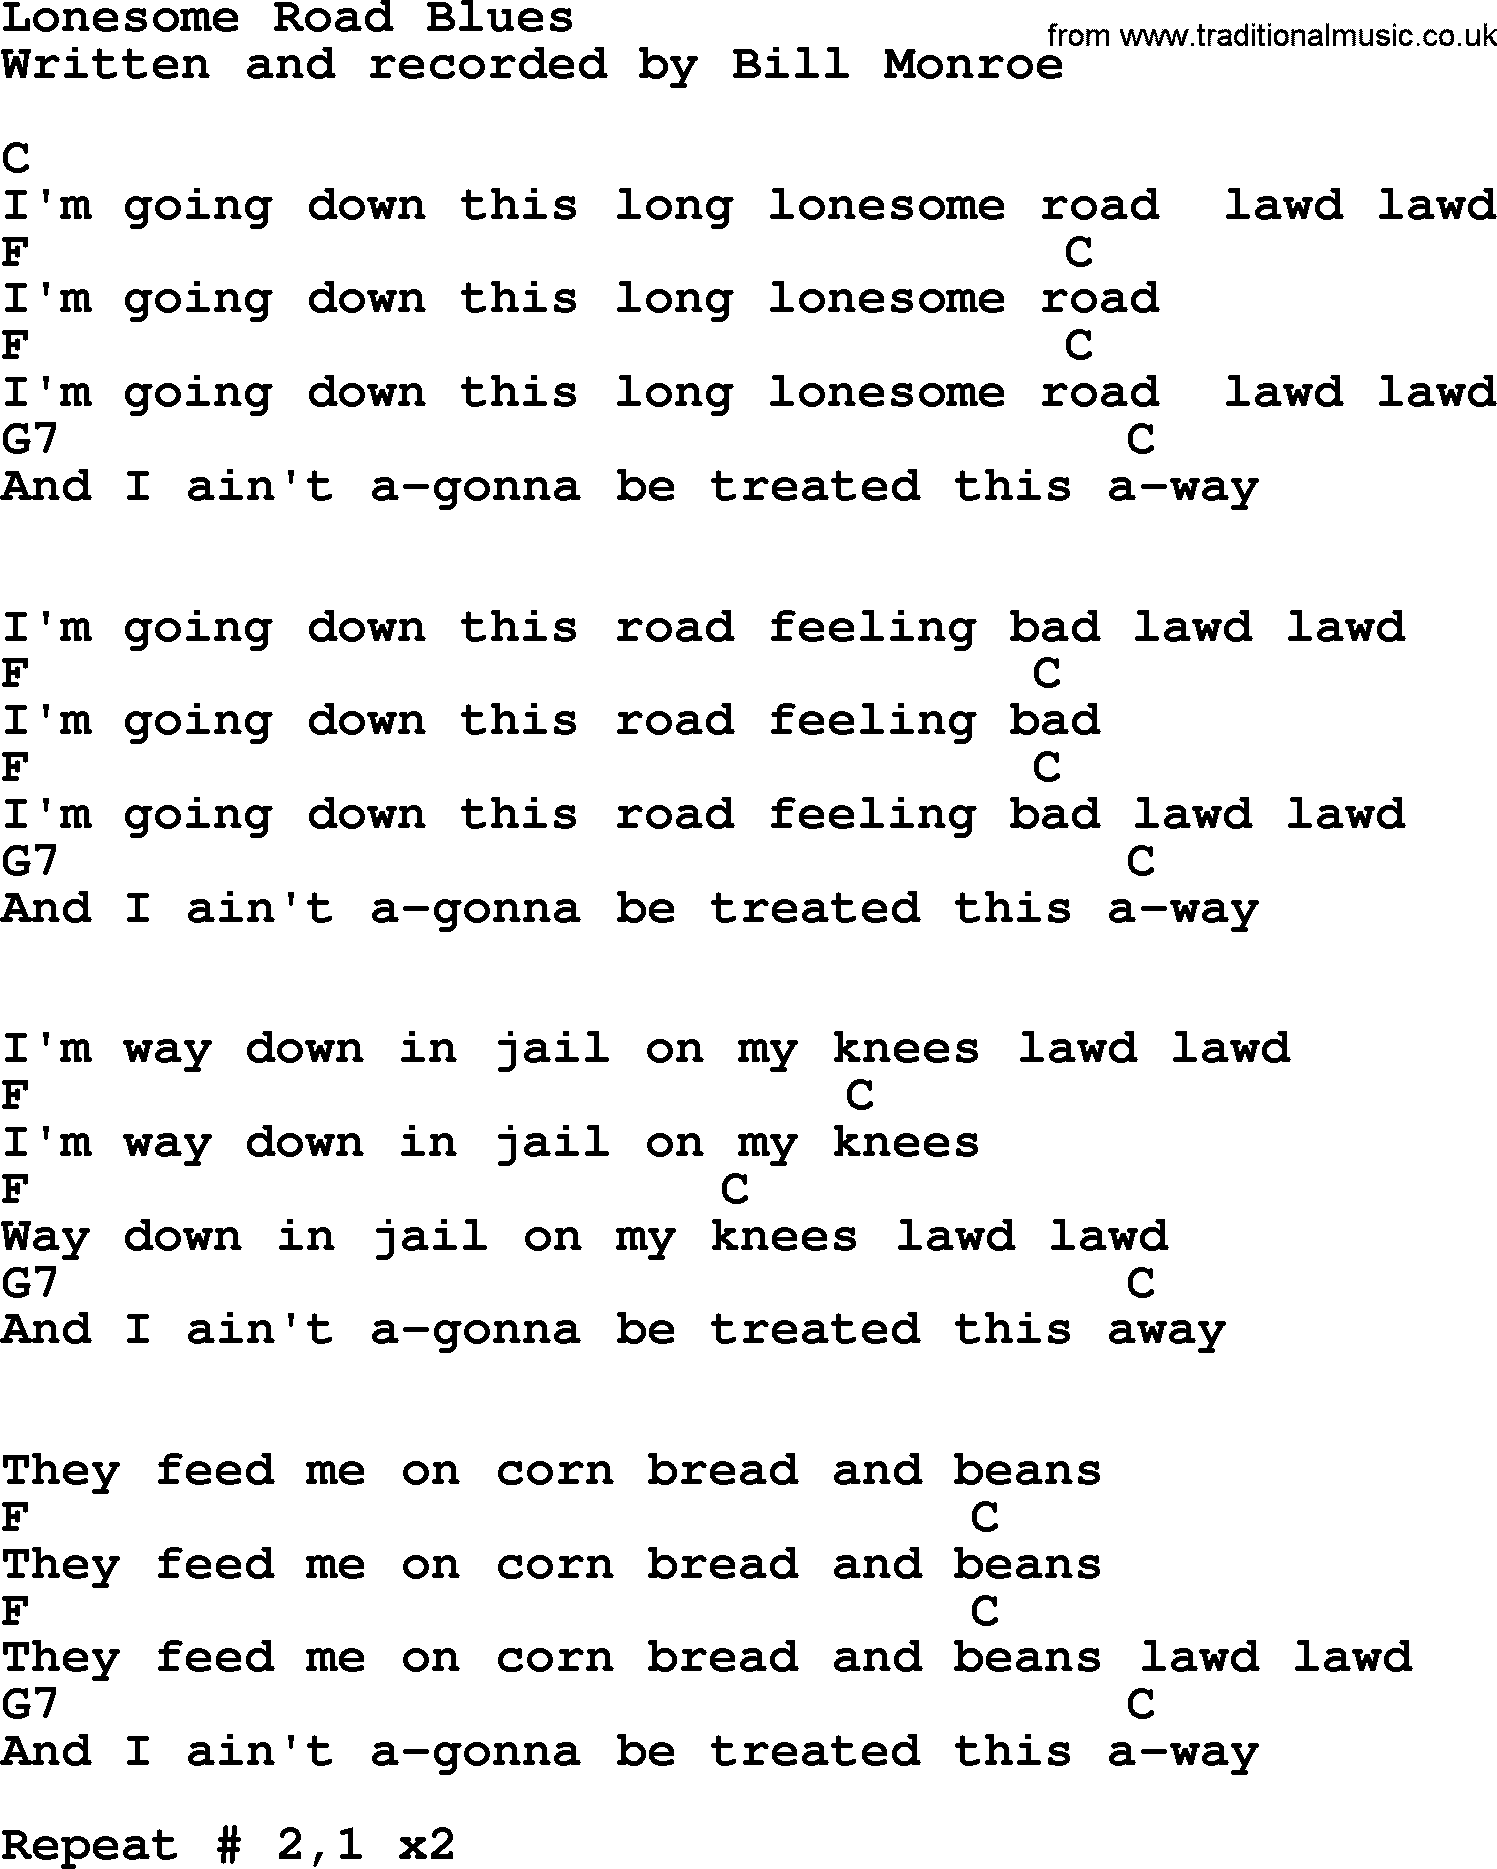 Bluegrass song: Lonesome Road Blues, lyrics and chords